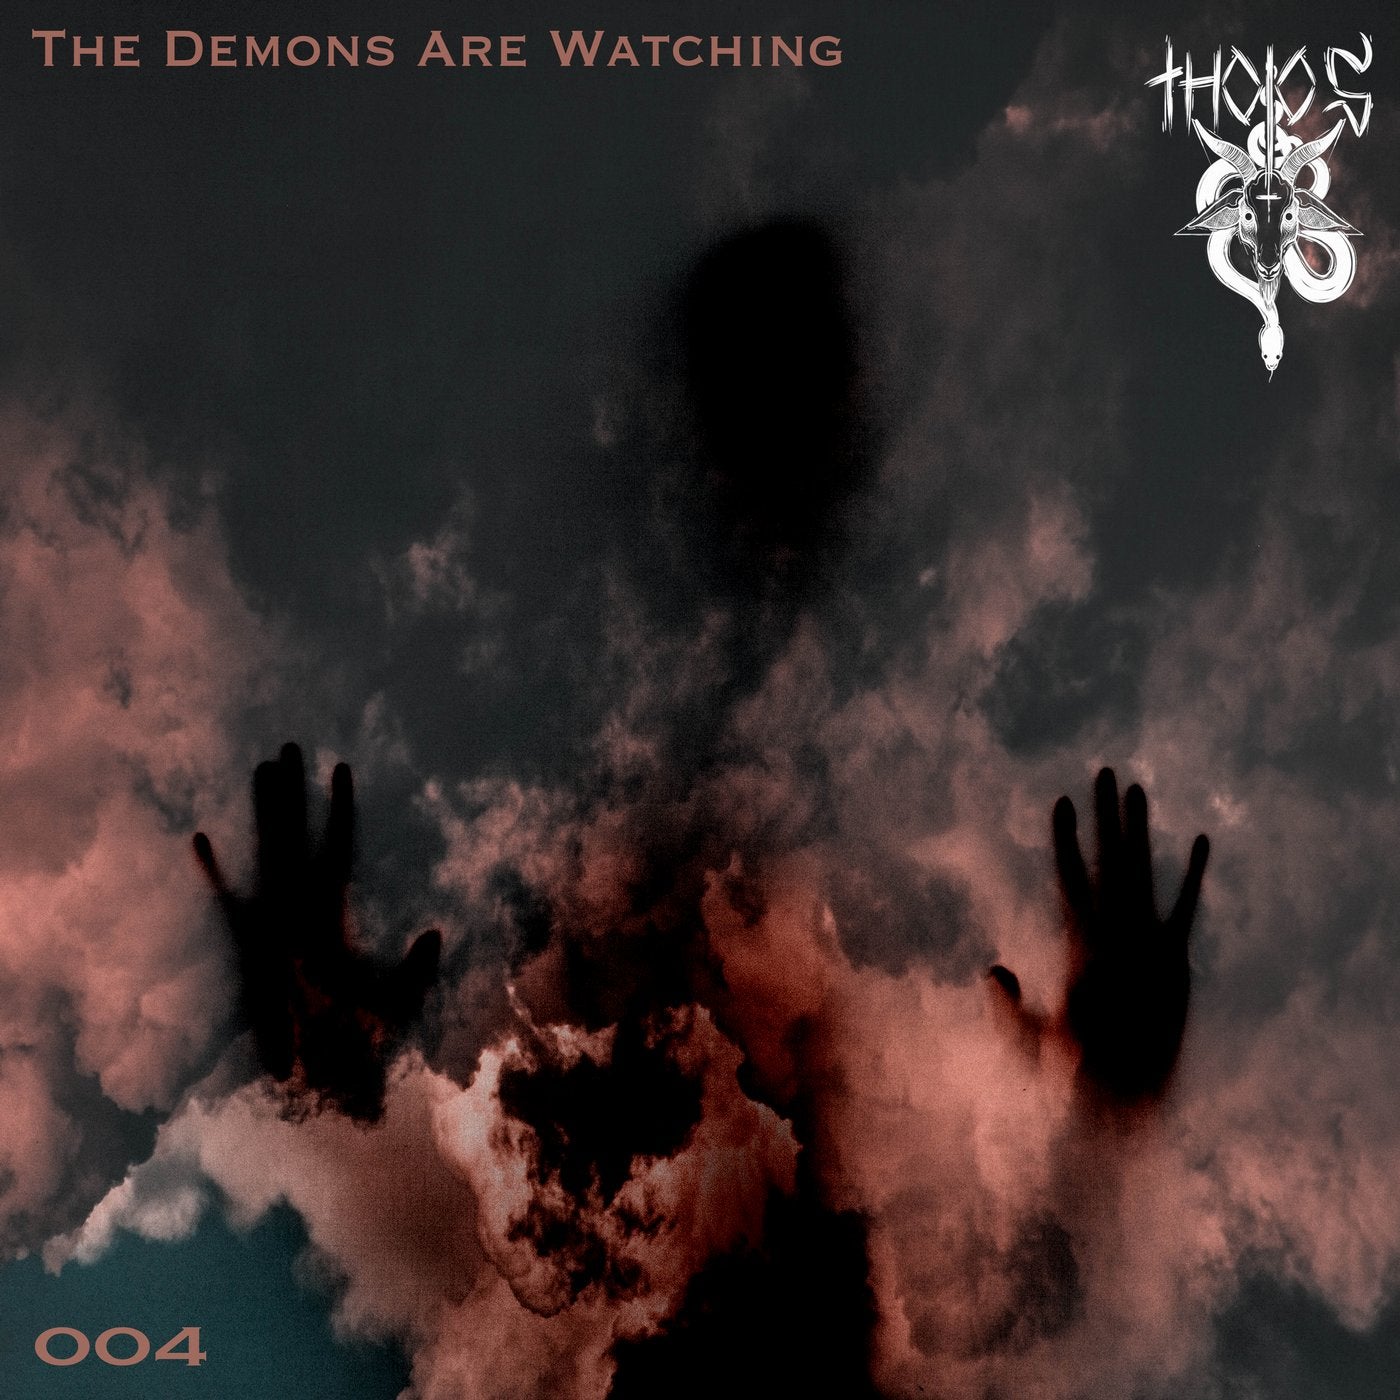 The Demons Are Watching